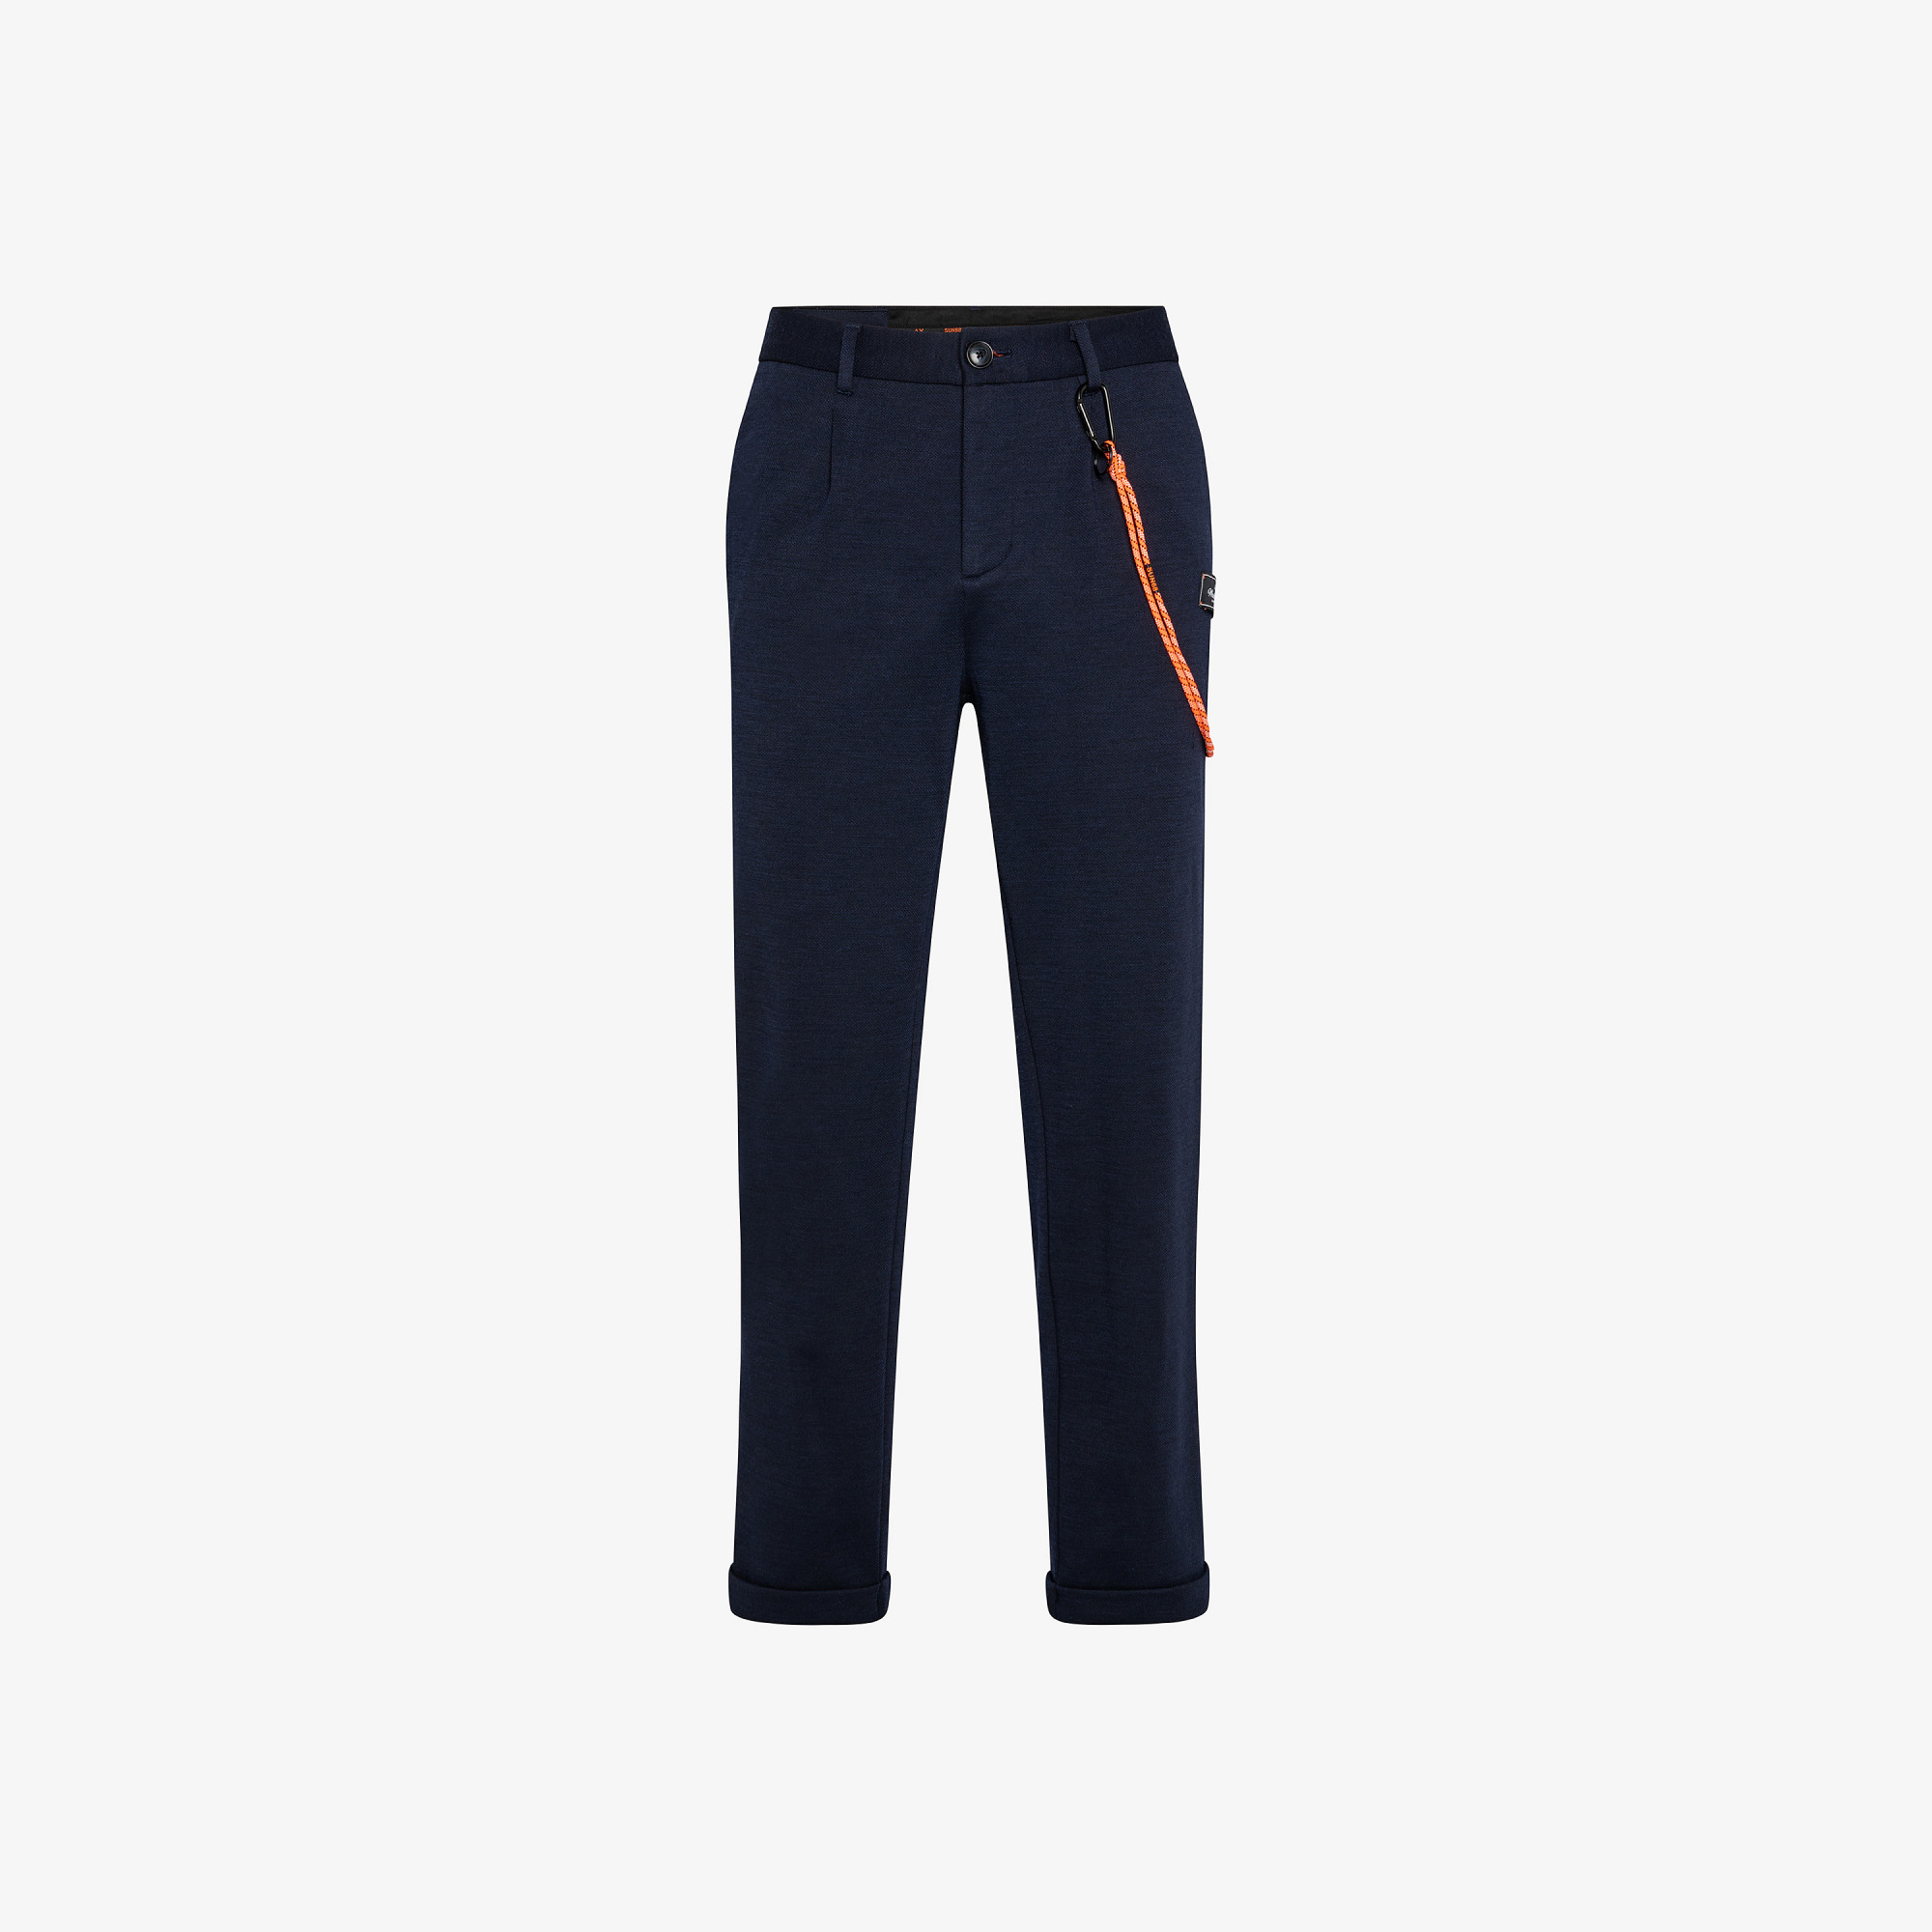 PANT PENCE JERSEY WOOL NAVY BLUE